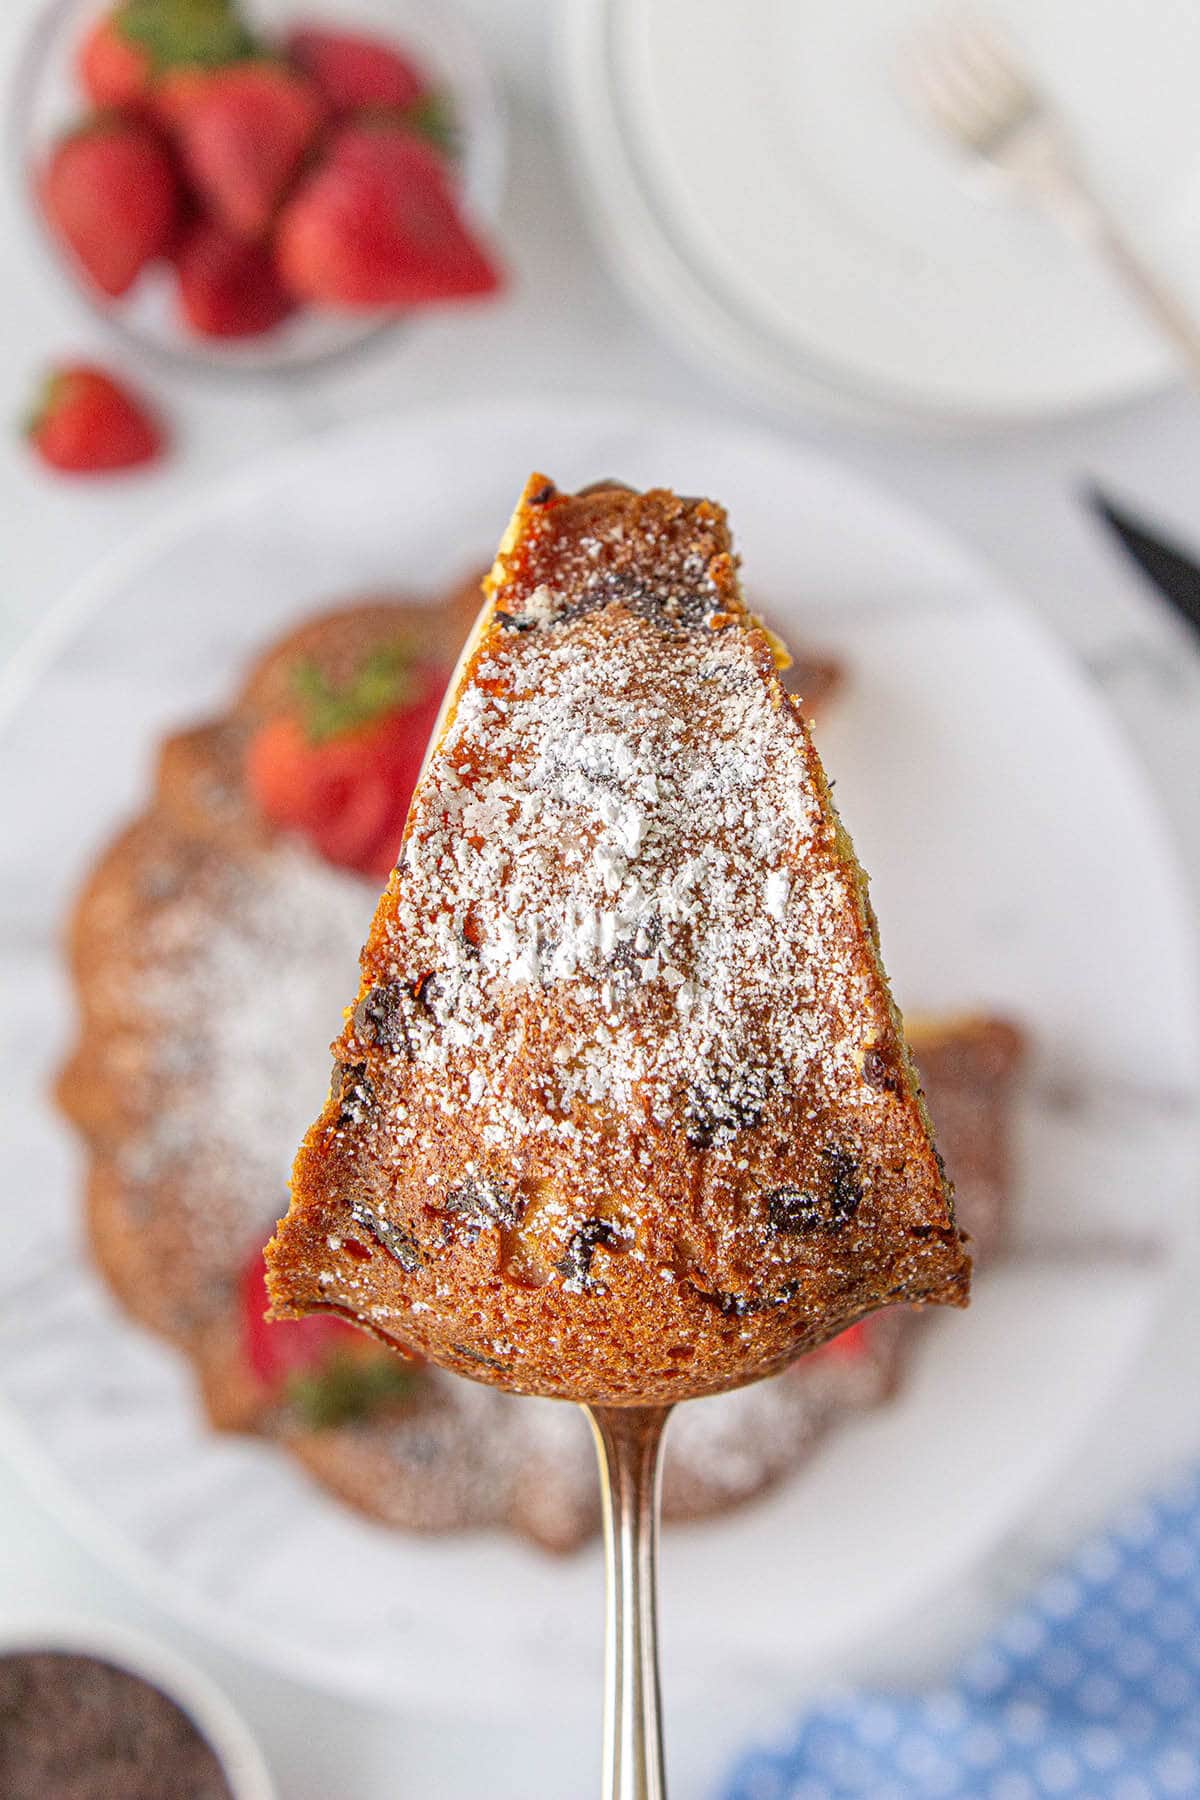 Slice of cake on spatula topped with powdered sugar.